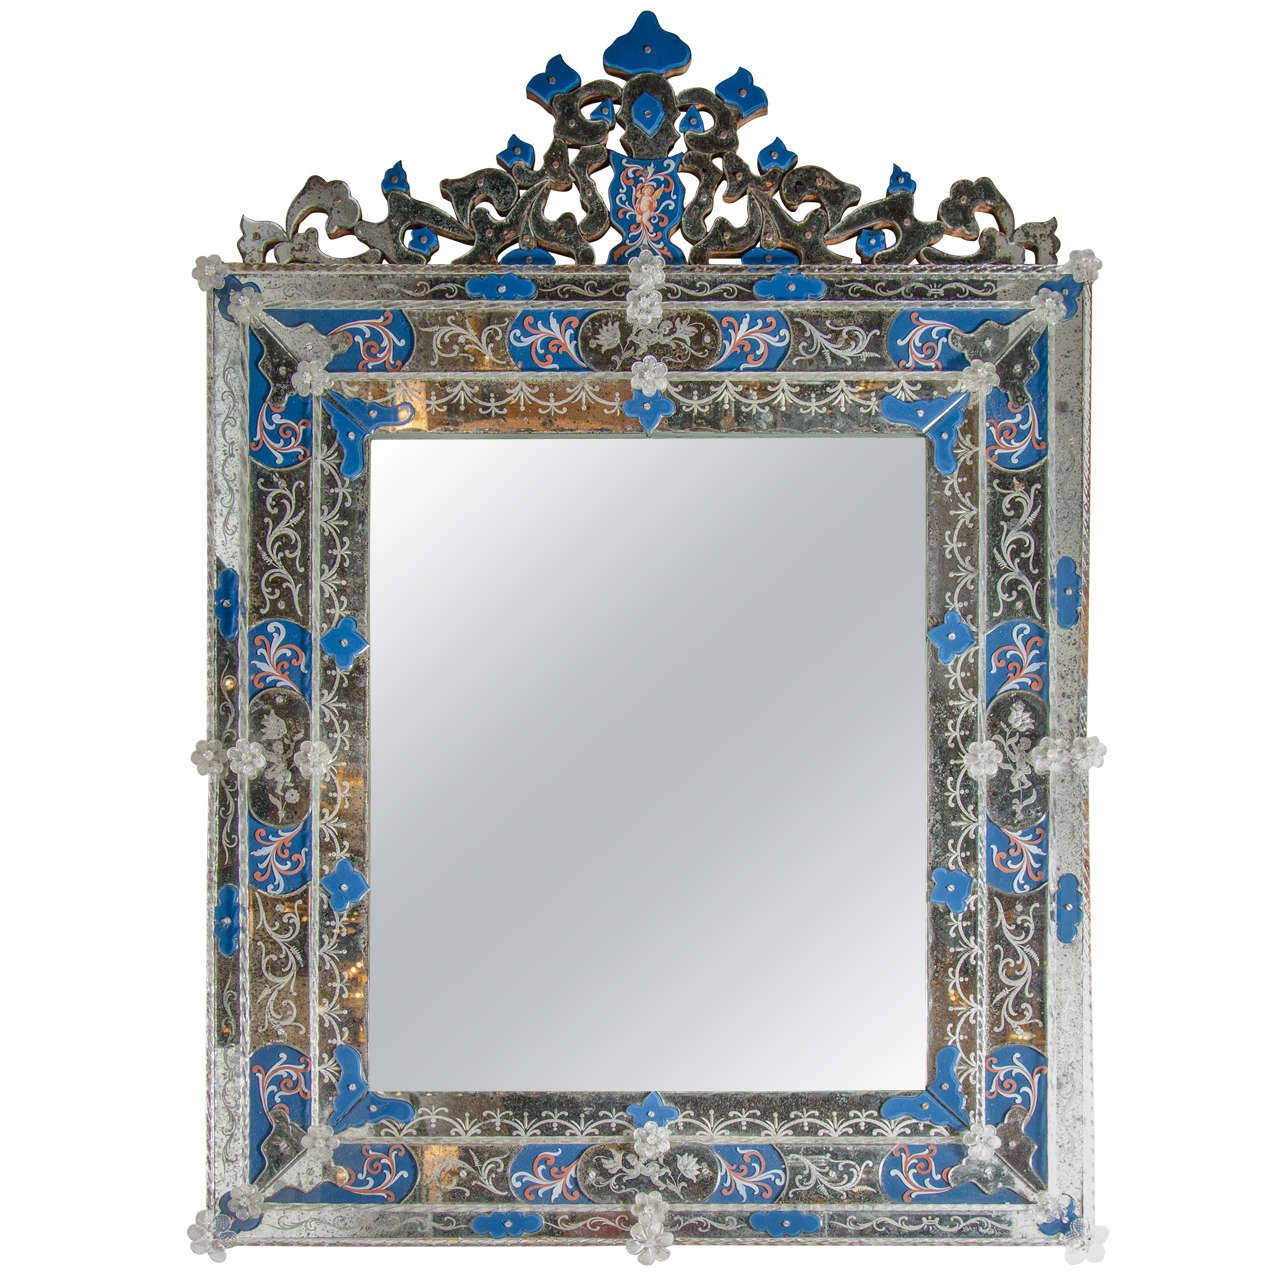 Exquisite Venetian Style Mirror with Inset Royal Blue Accents